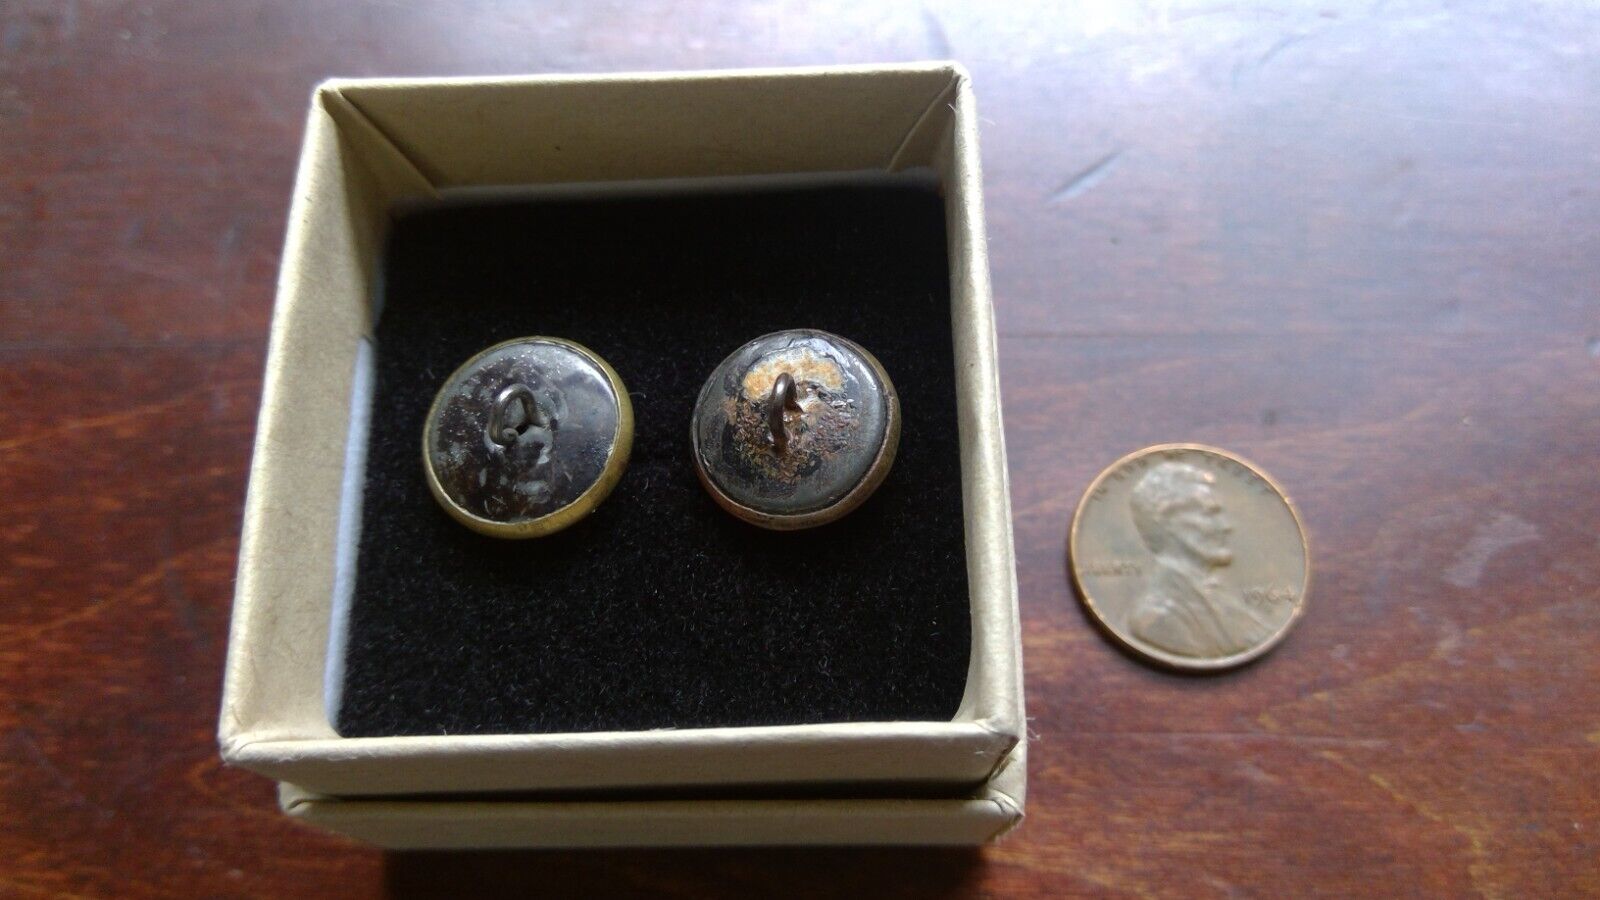 Astrea Antique Metal Brass Victorian Picture Buttons 15mm Lot of 2, 9/16th Inch Без бренда - фотография #5